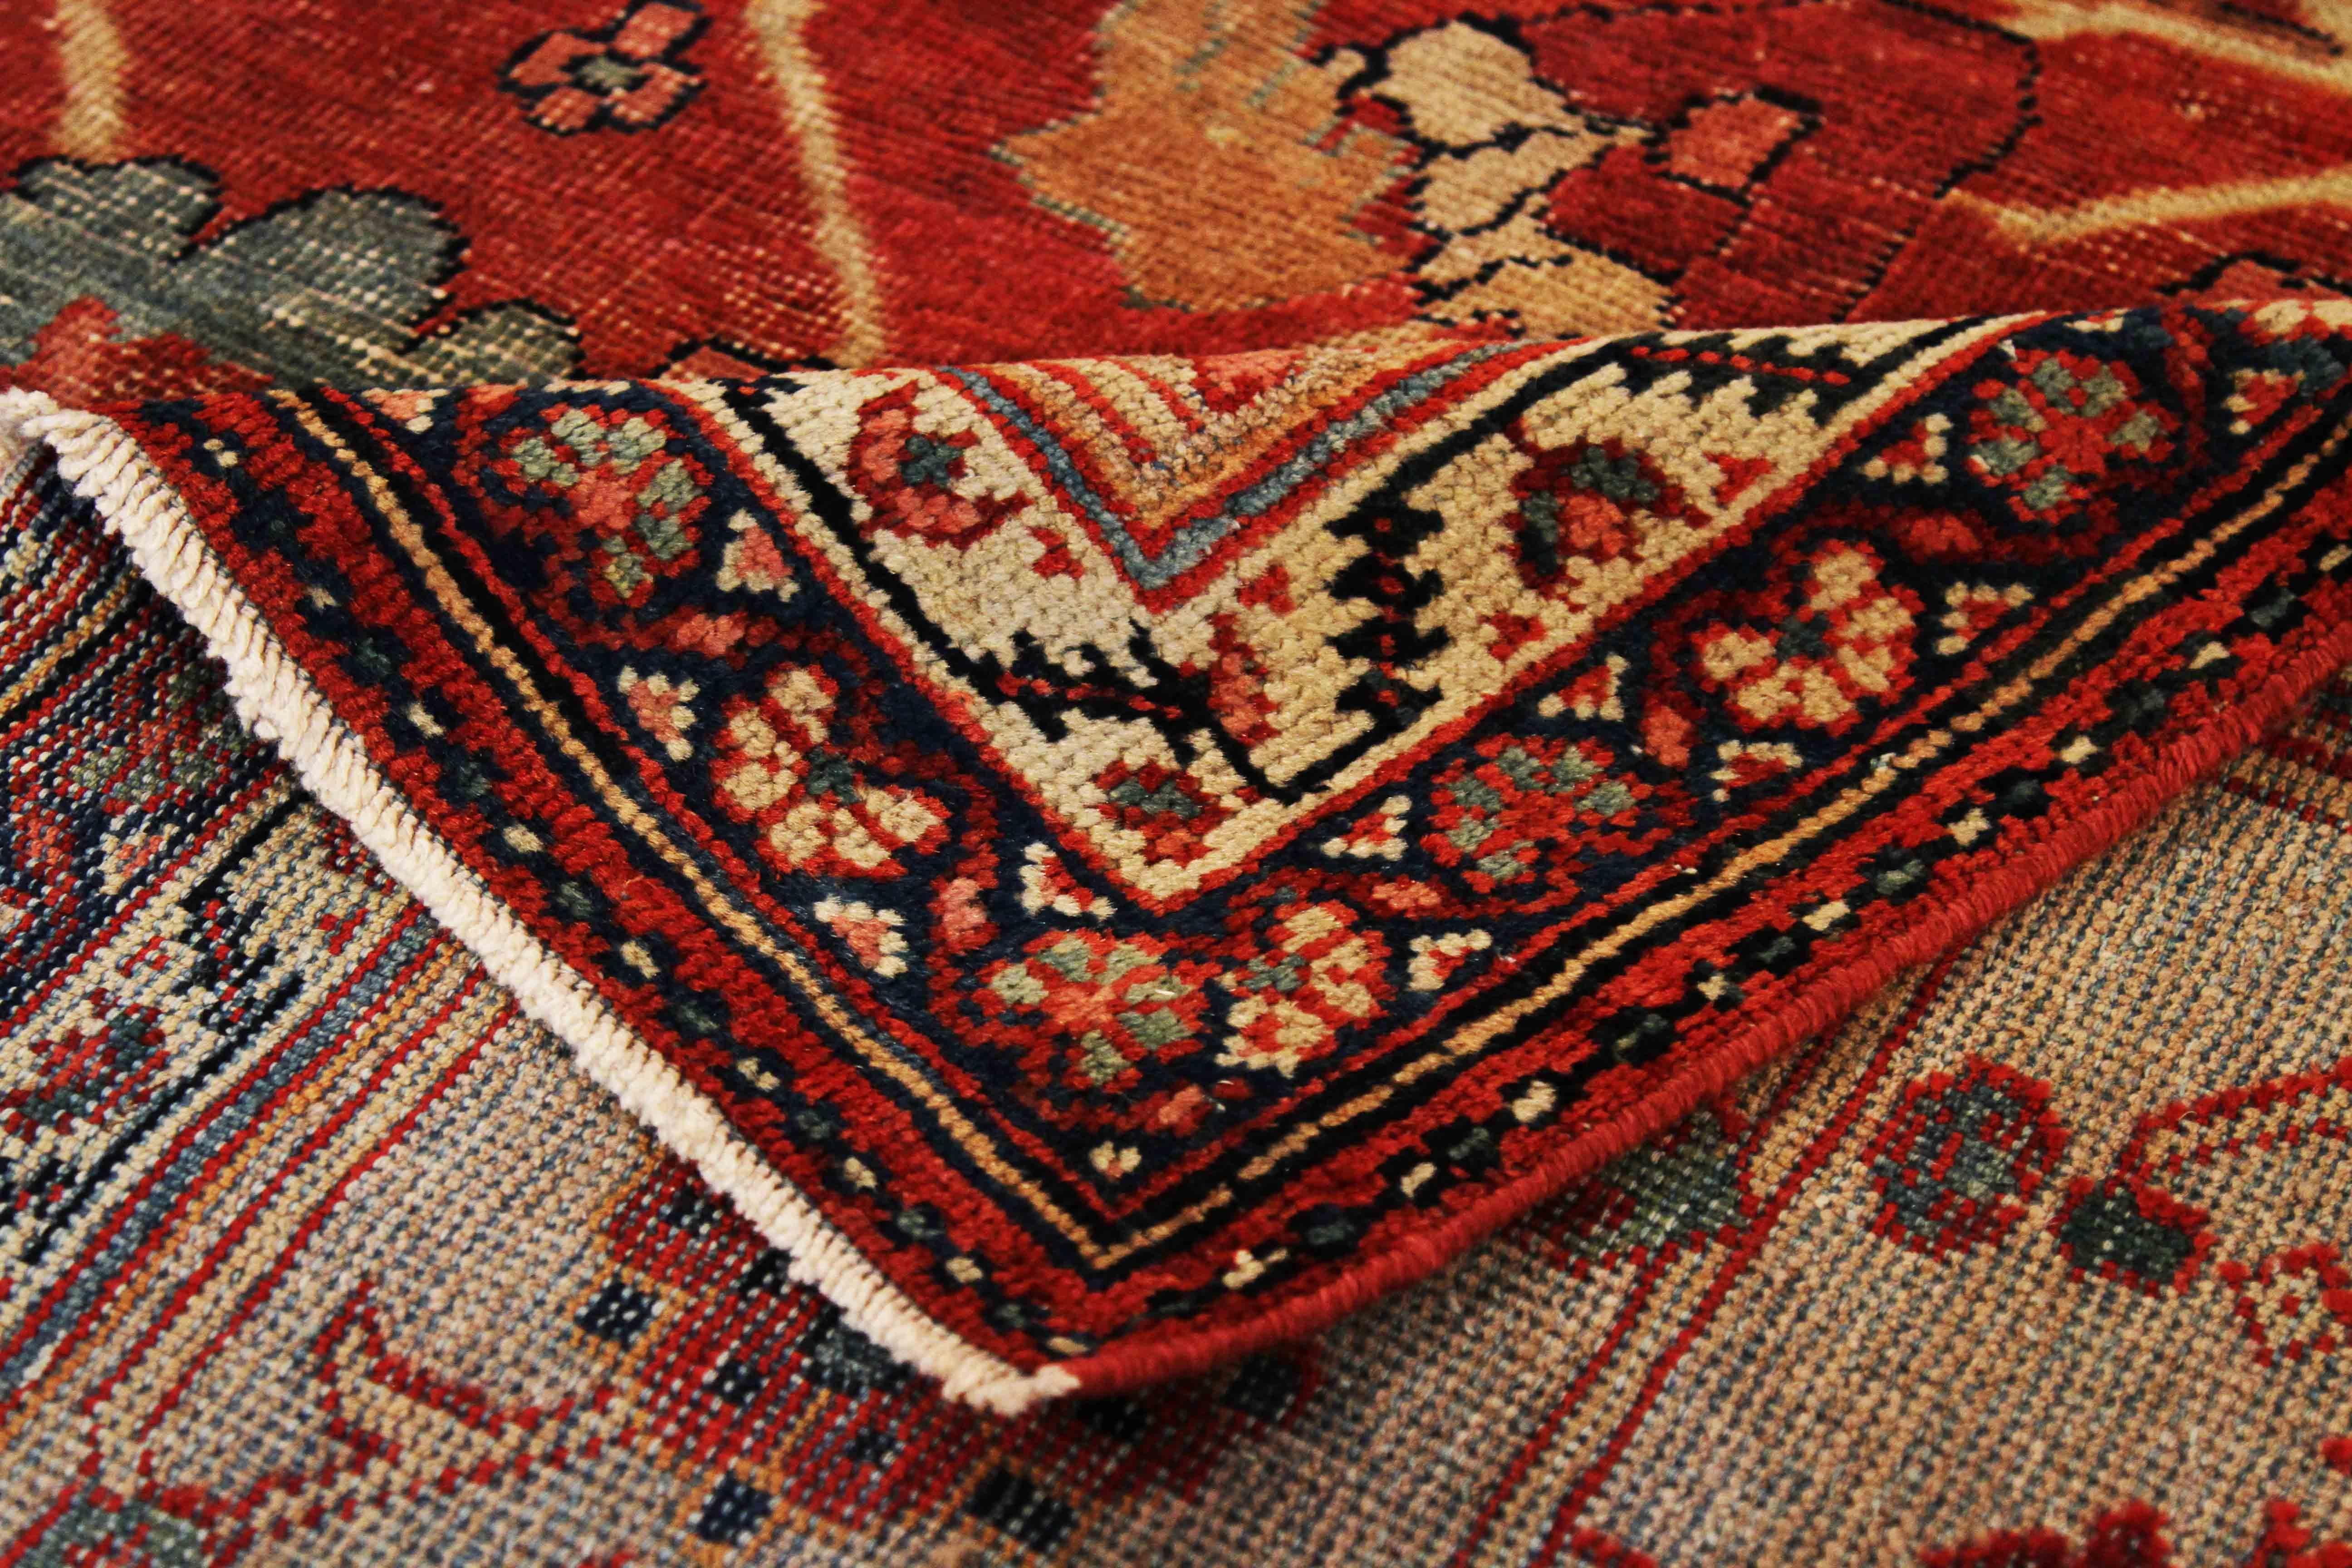 Handmade in the 1940s using the finest quality of wool and vegetable dyes. It’s an antique Persian rug woven with design patterns mastered by Sultanabad weavers. It features a powerful mix of red, black and green floral details which matches nicely